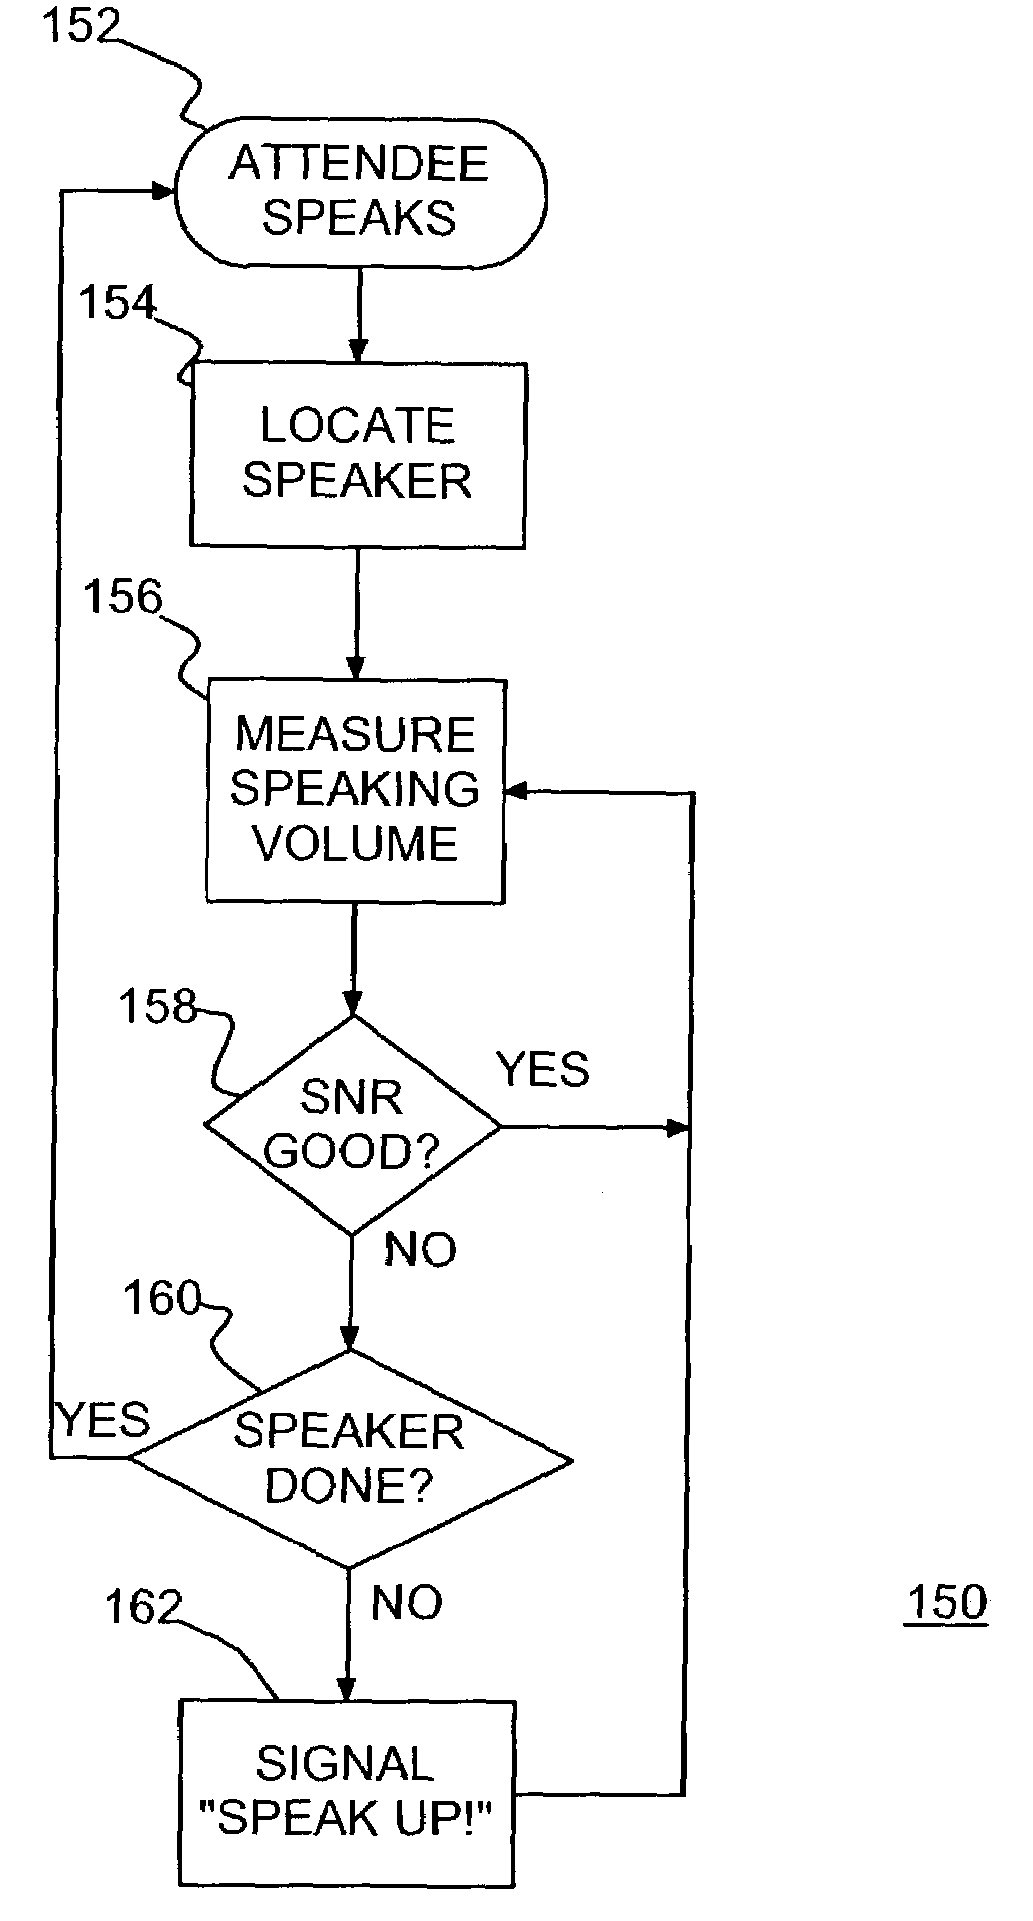 Automatic speak-up indication for conference call attendees